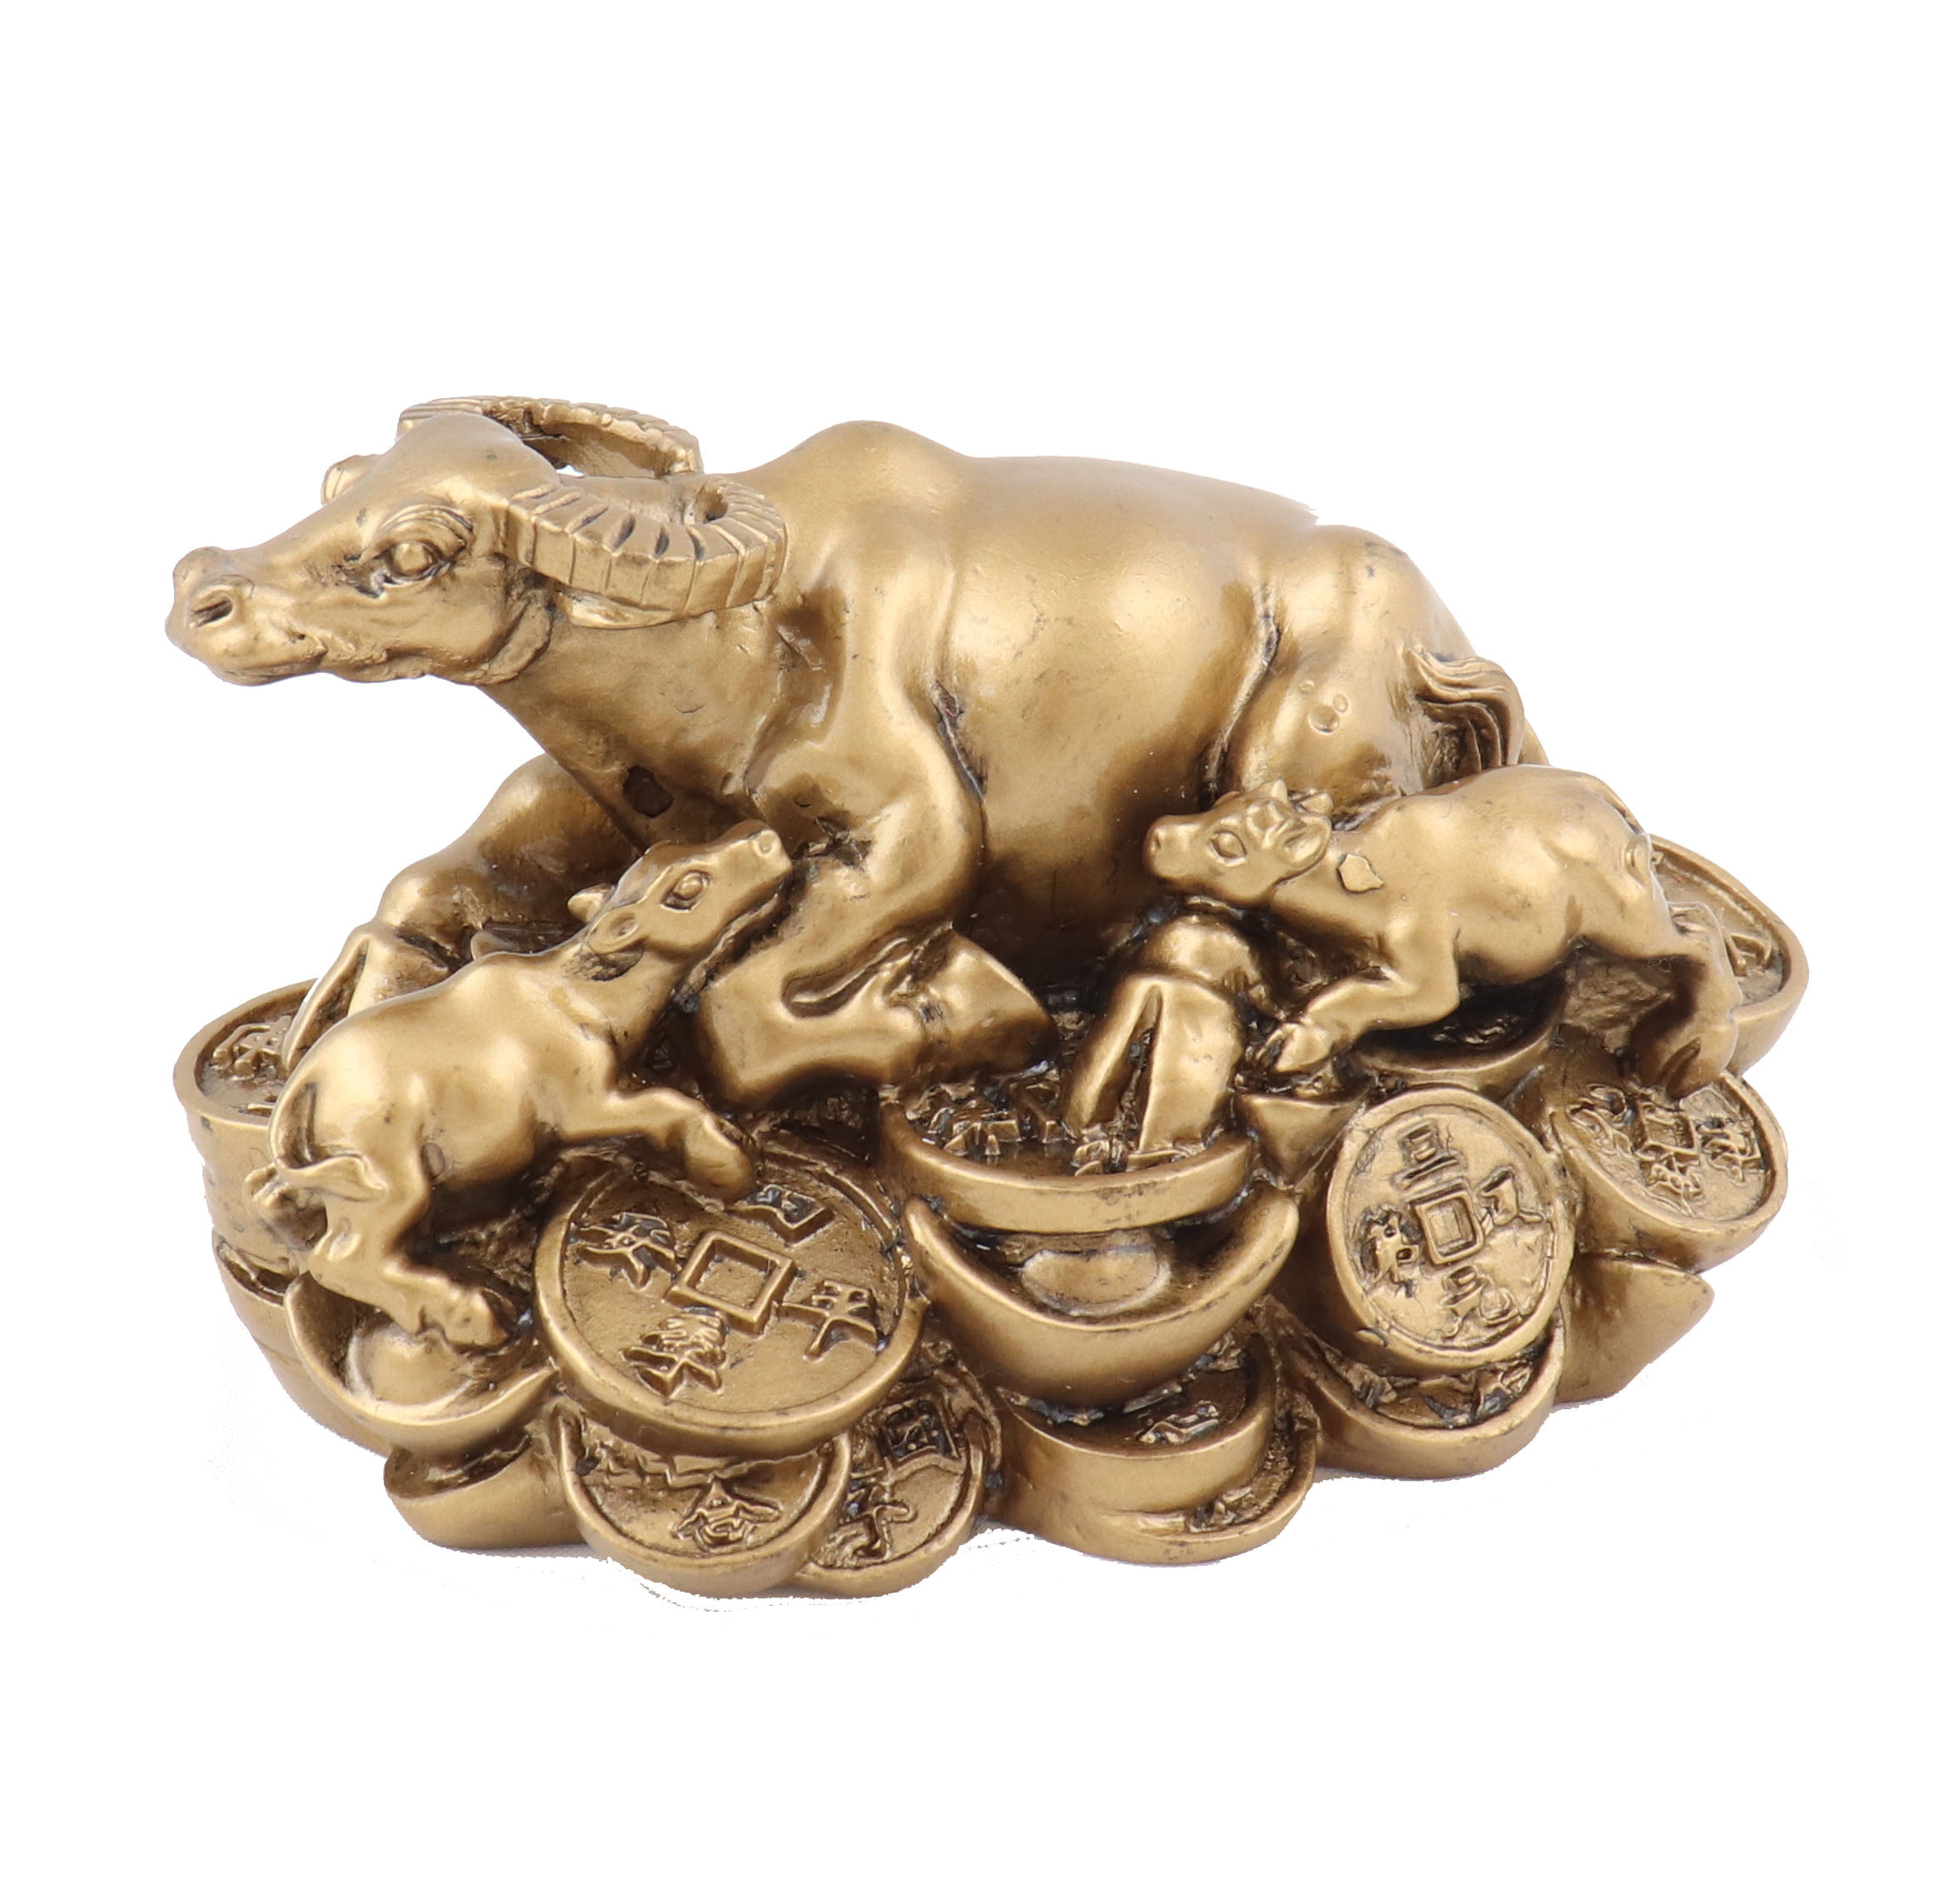 Details about   China Feng Shui brass wealth coin Zodiac animal Wall Street Ox Bull oxen statue 